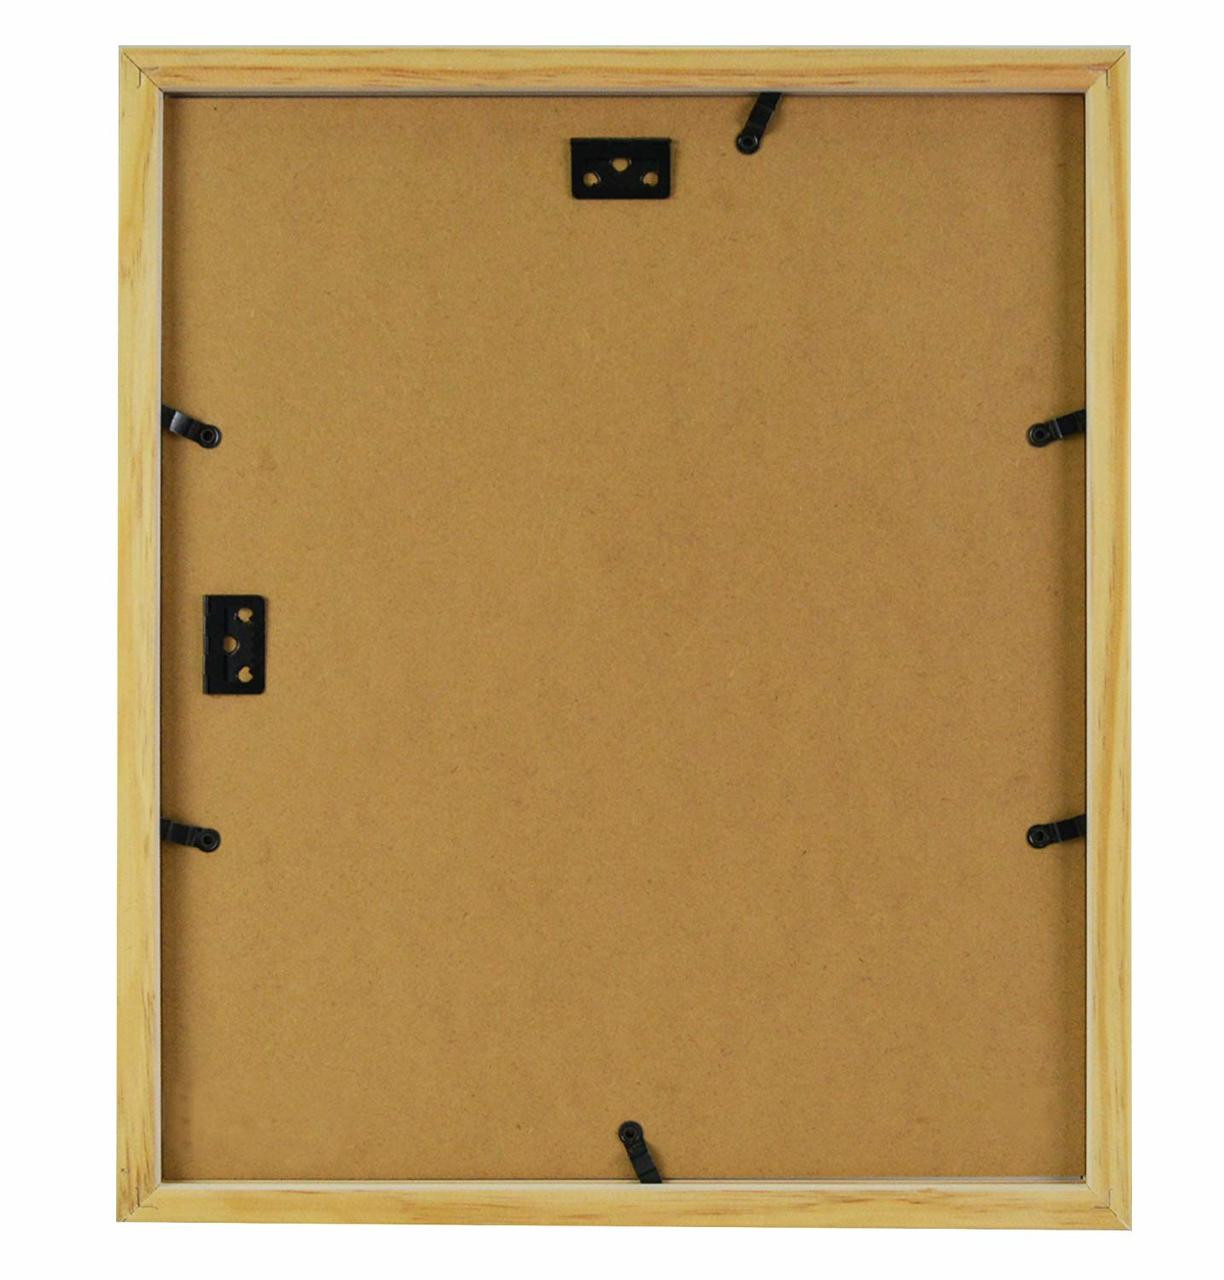 Smooth White 18x24 White Picture Mats with White Core for 13x19 Pictures -  Fits 18x24 Frame 